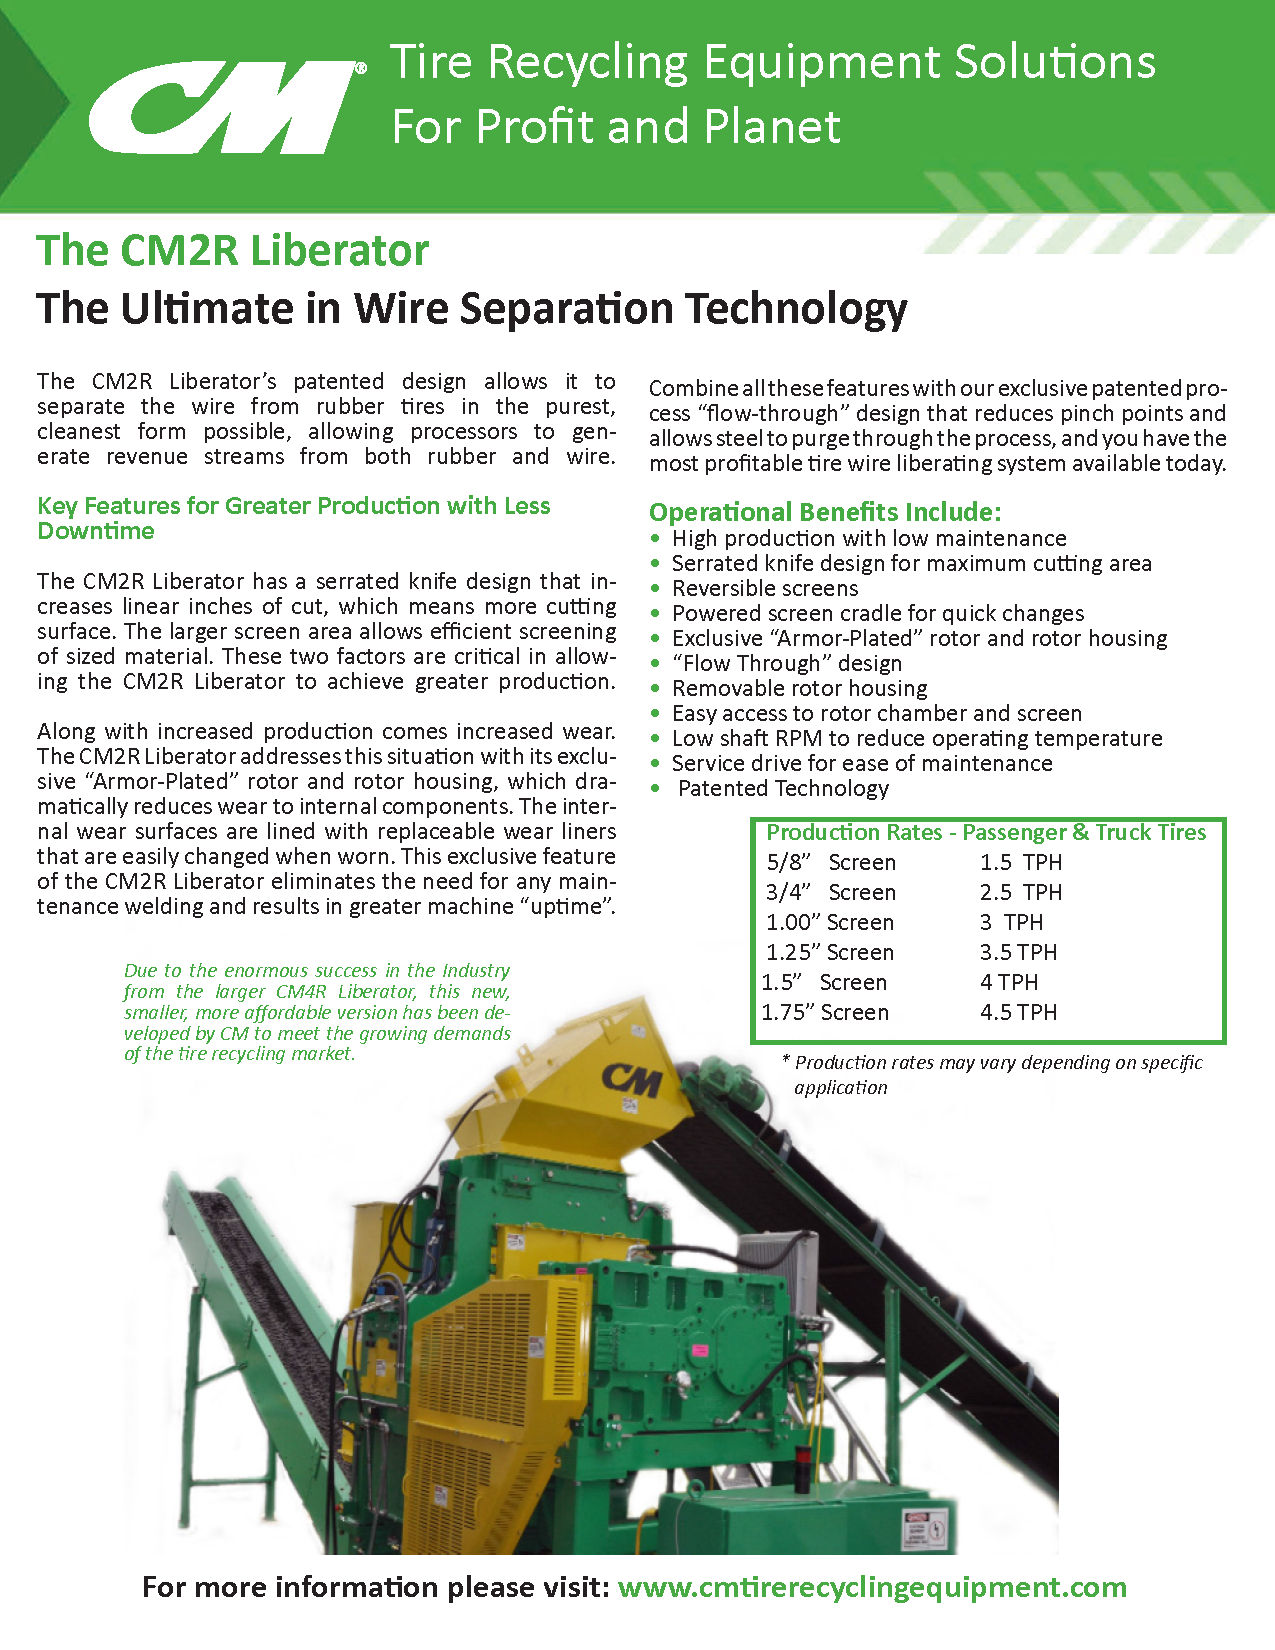 Learn more by viewing The CM2R Liberator Brochure. 